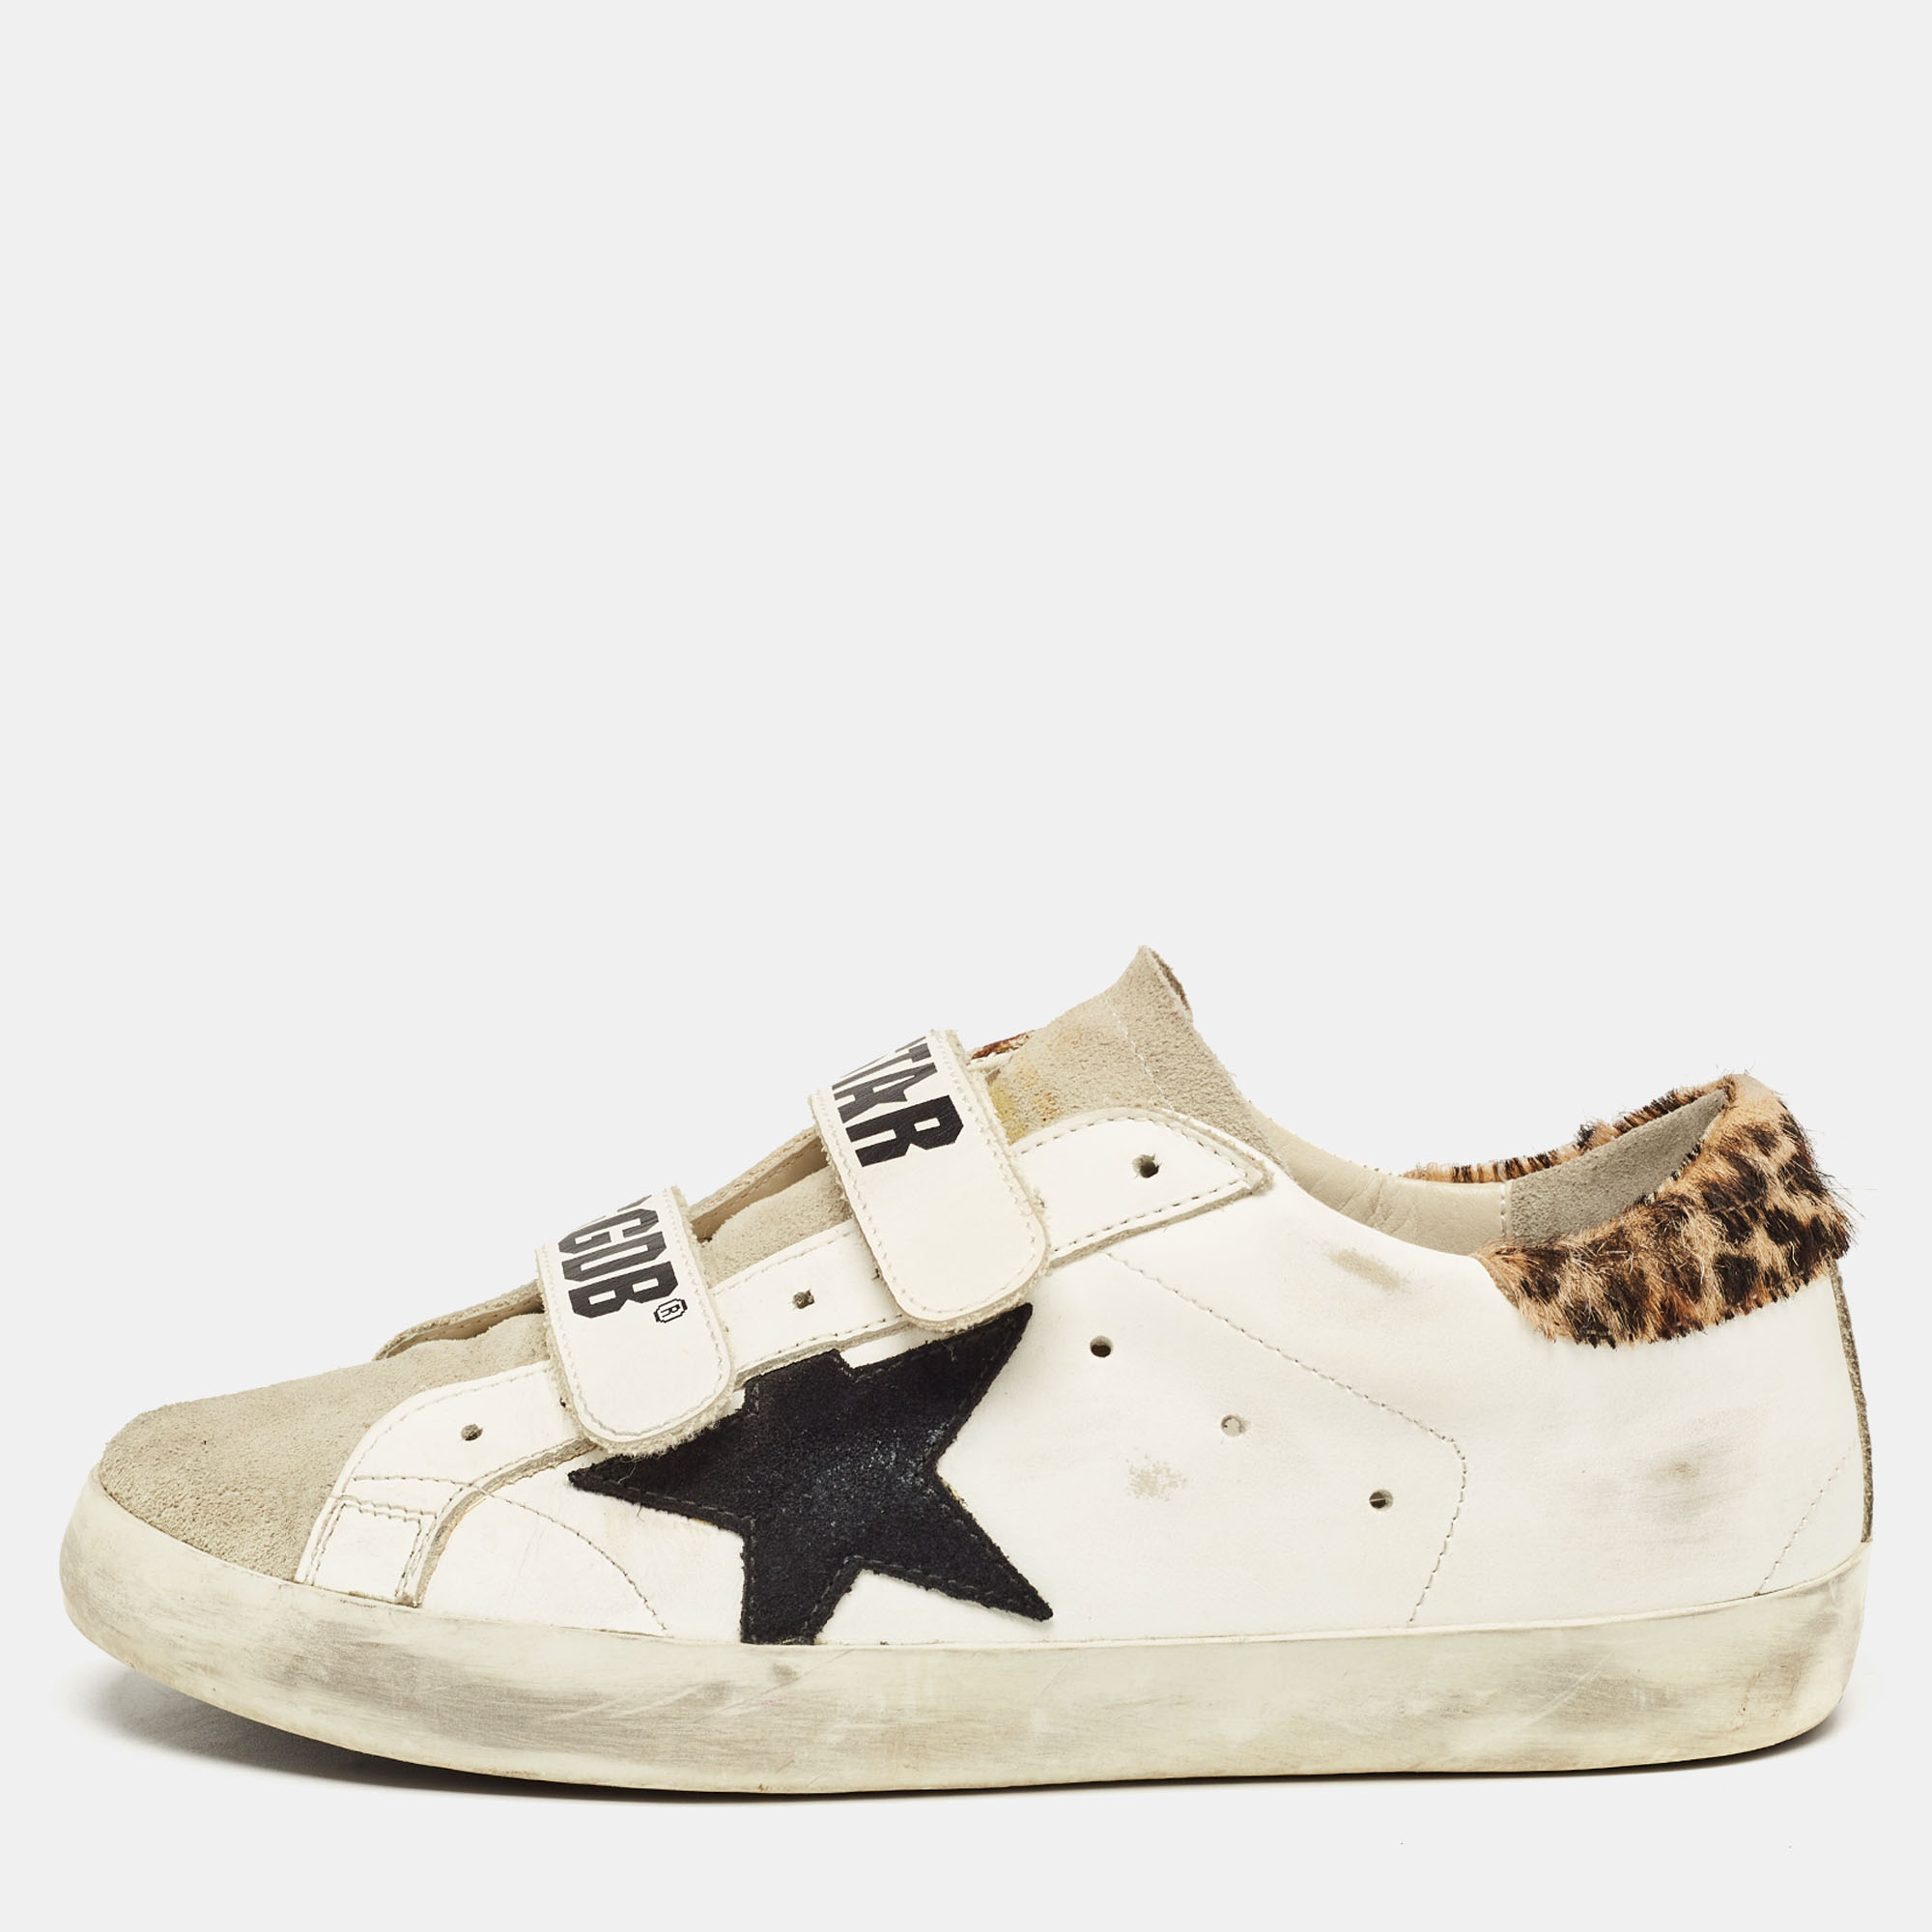 Golden goose white/grey leather and suede old school sneakers size 37